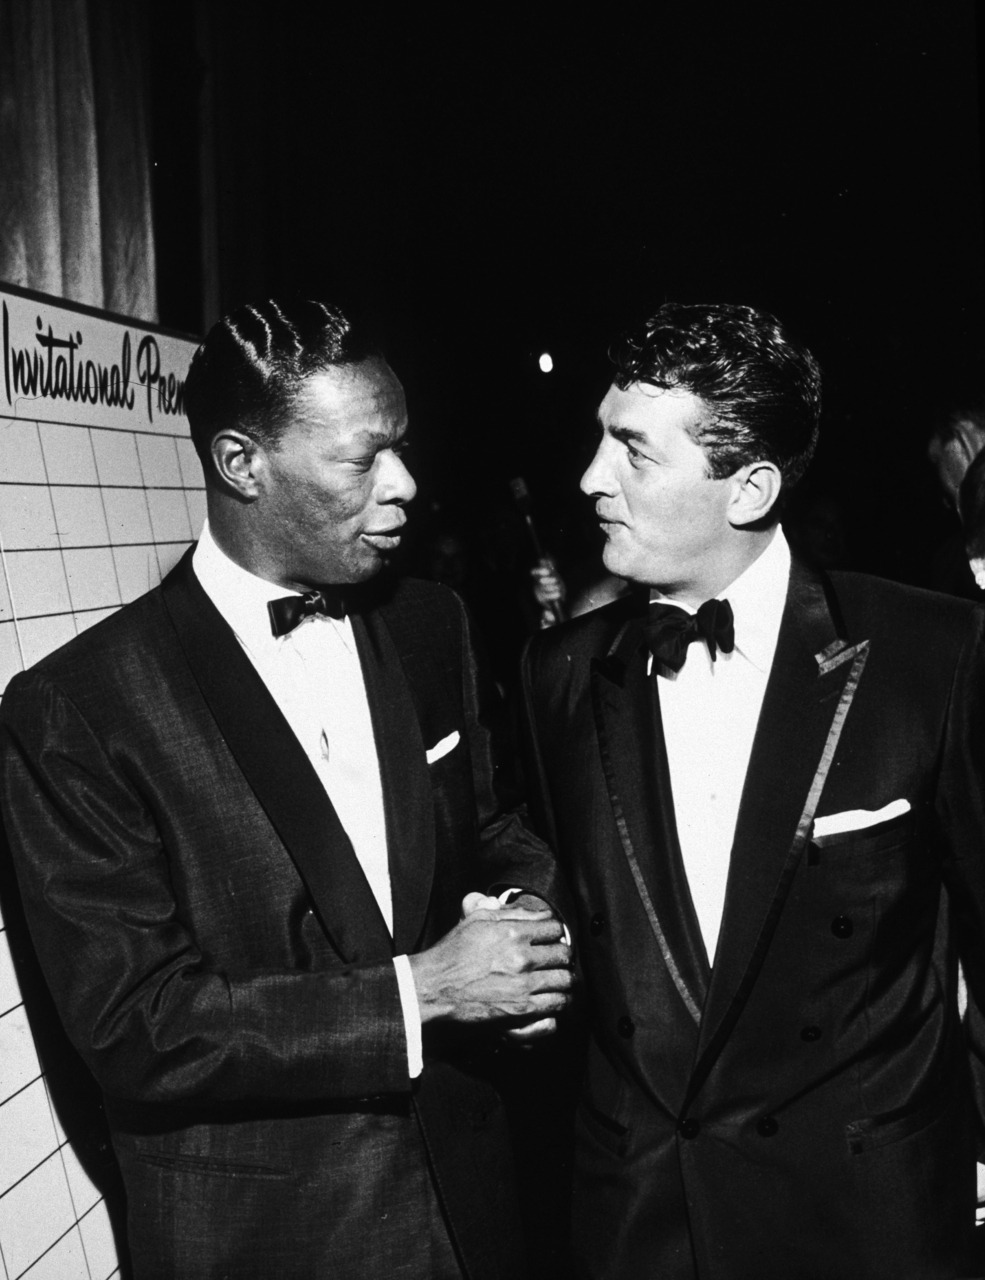 fuckyeahthekingofcool:
“ Nat King Cole chats with Dean Martin, while attending the premiere for Raintree County (1957).
”